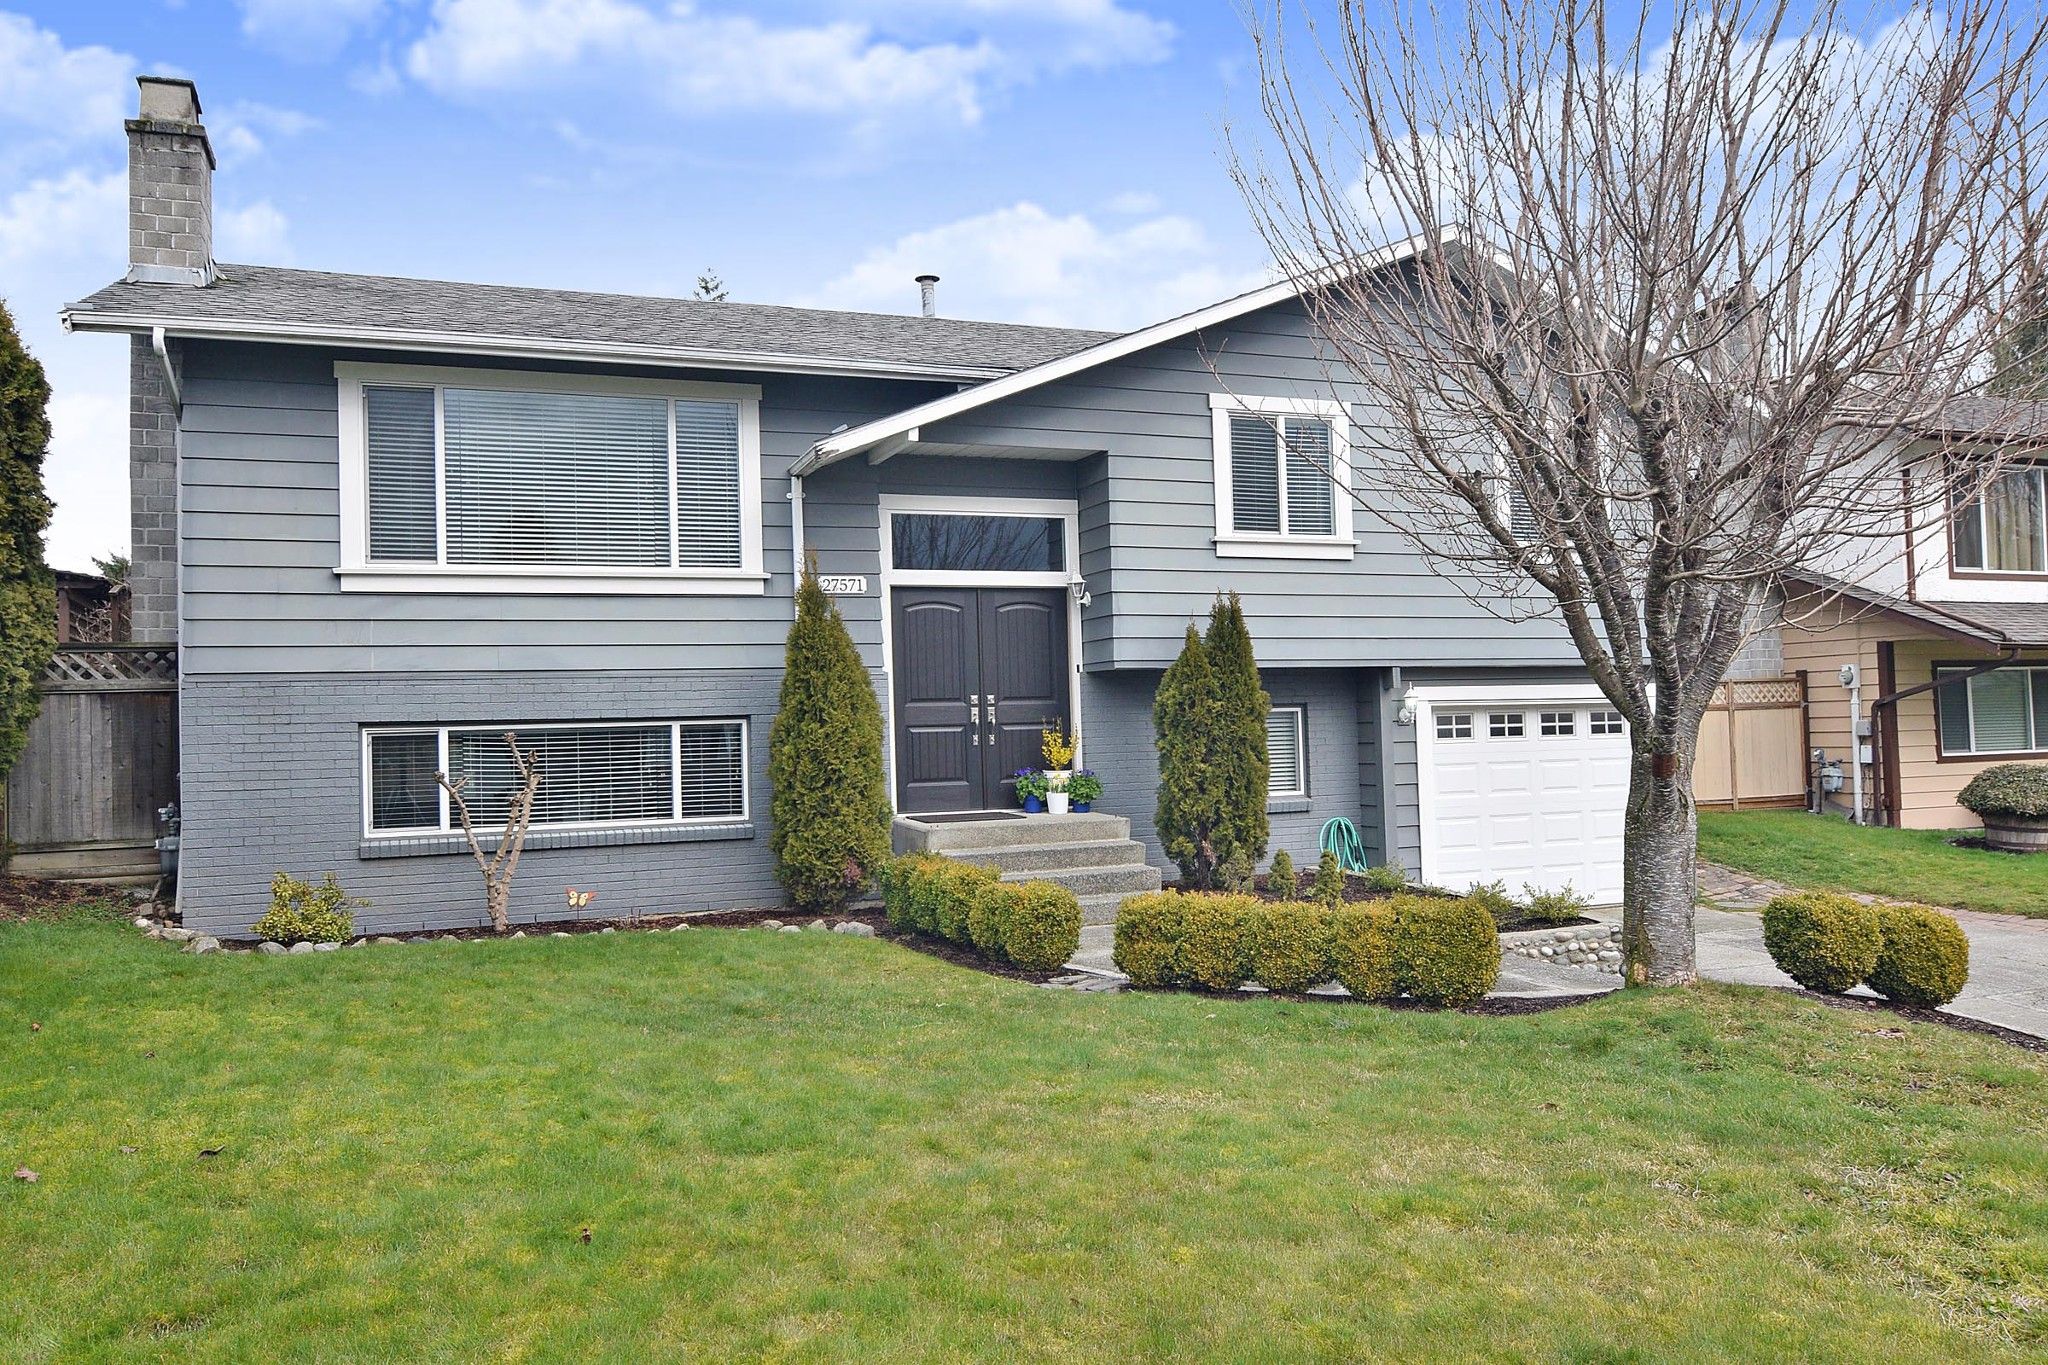 Main Photo: 27571 32A Avenue in Langley: Aldergrove Langley House for sale : MLS®# R2438545